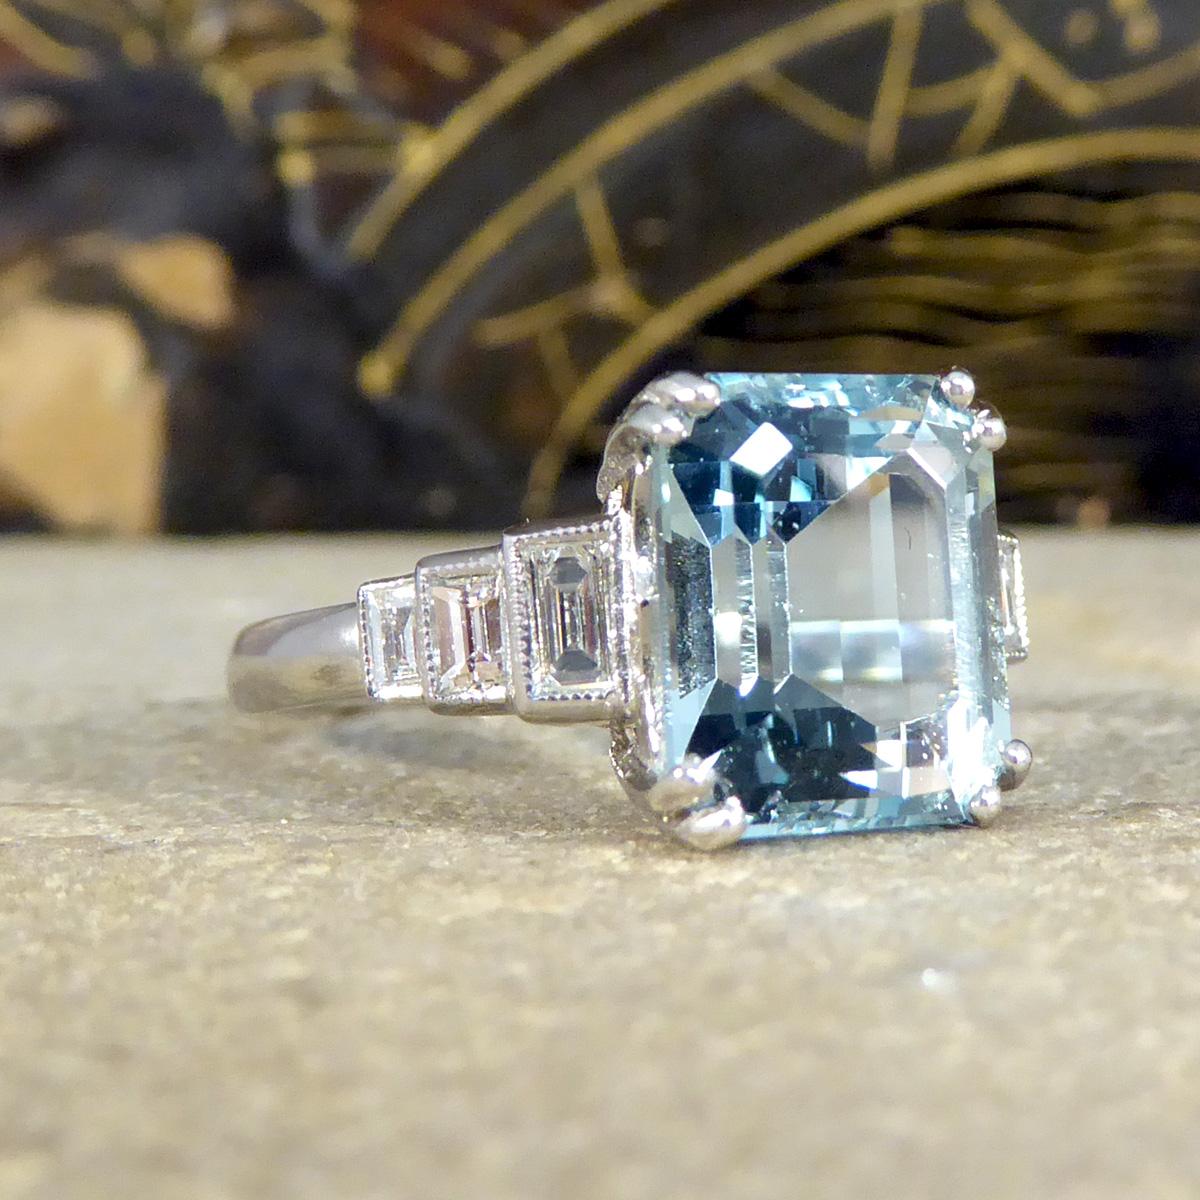 Featuring in this gorgeous ring is a gorgeous and light blue 3.30ct Emerald Cut Aquamarine modelled and designed to resemble a quality popular Art Deco style. On either shoulder sits three Baguette Cut Diamonds graduating in size, from the largest